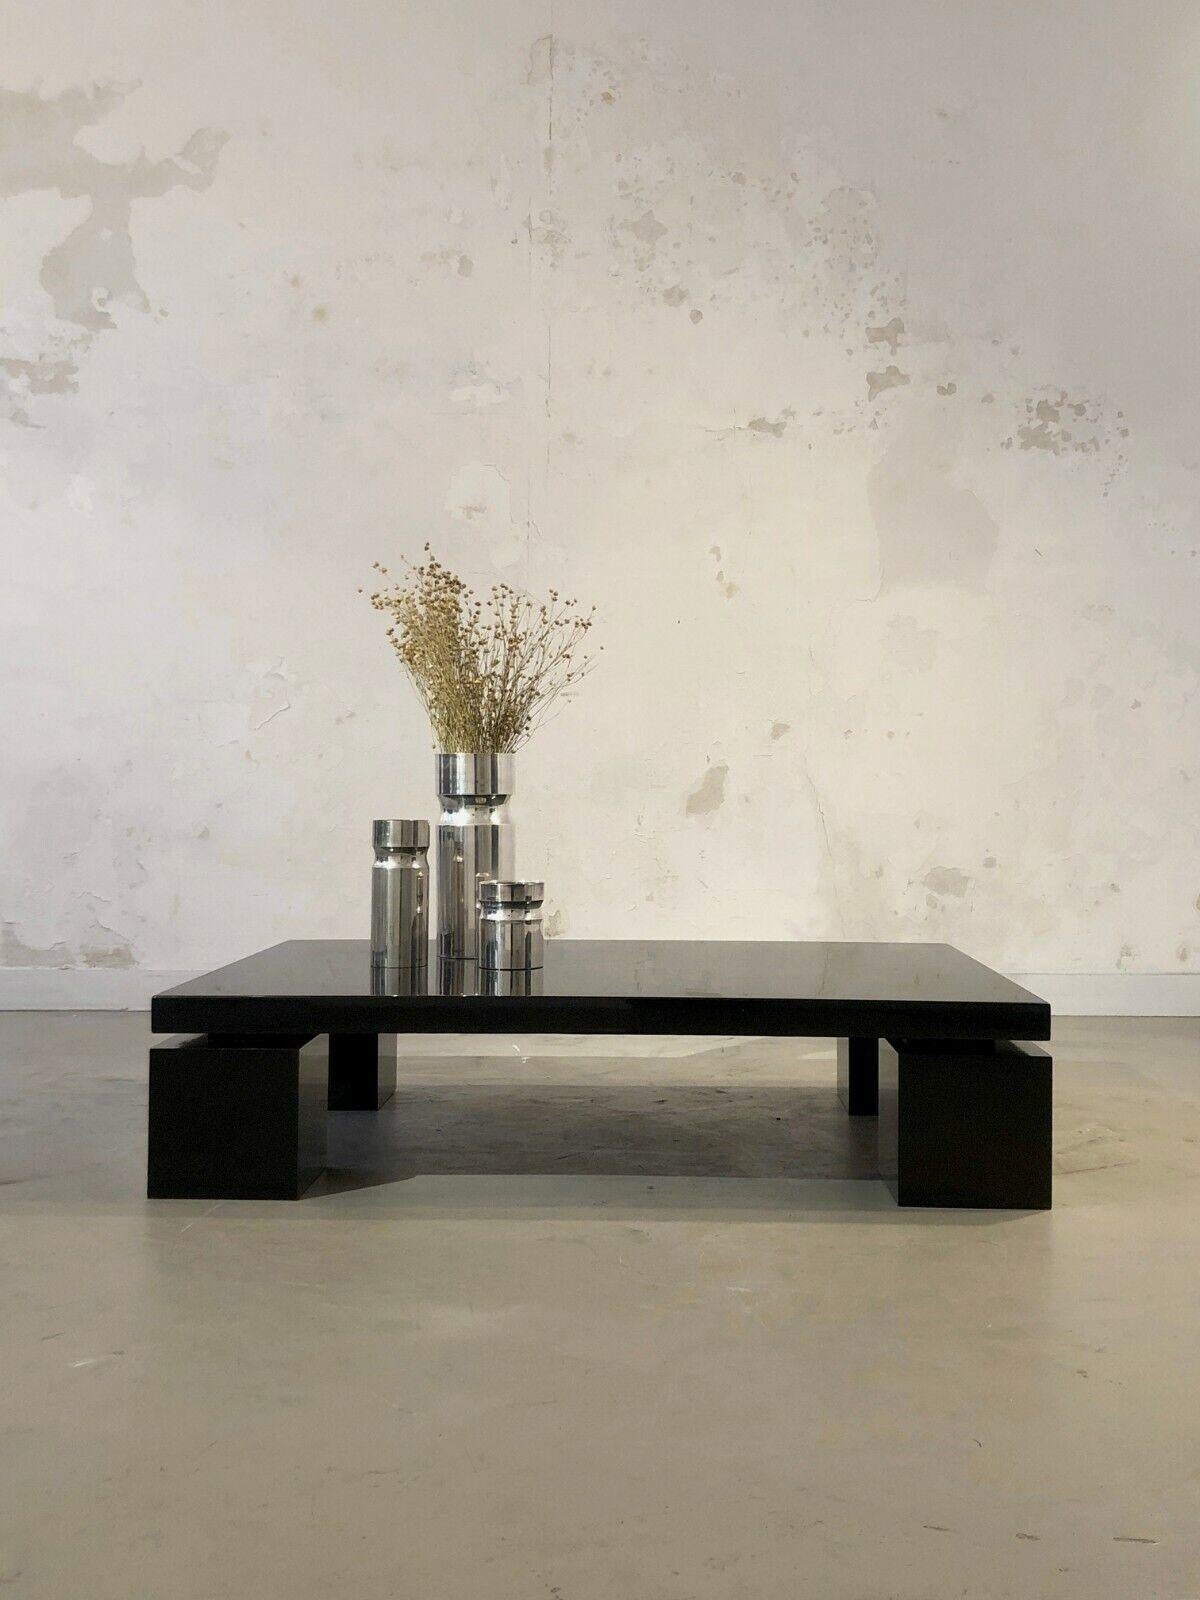 A large and rigorous rectangular coffee table, Post-Modern, Memphis, Constructivist, geometric structure of the laminate wood lacquered in black, heavy square legs, the tray in semi-suspension, by Willy Rizzo, ed. Cidue, Italy 1970-1980.